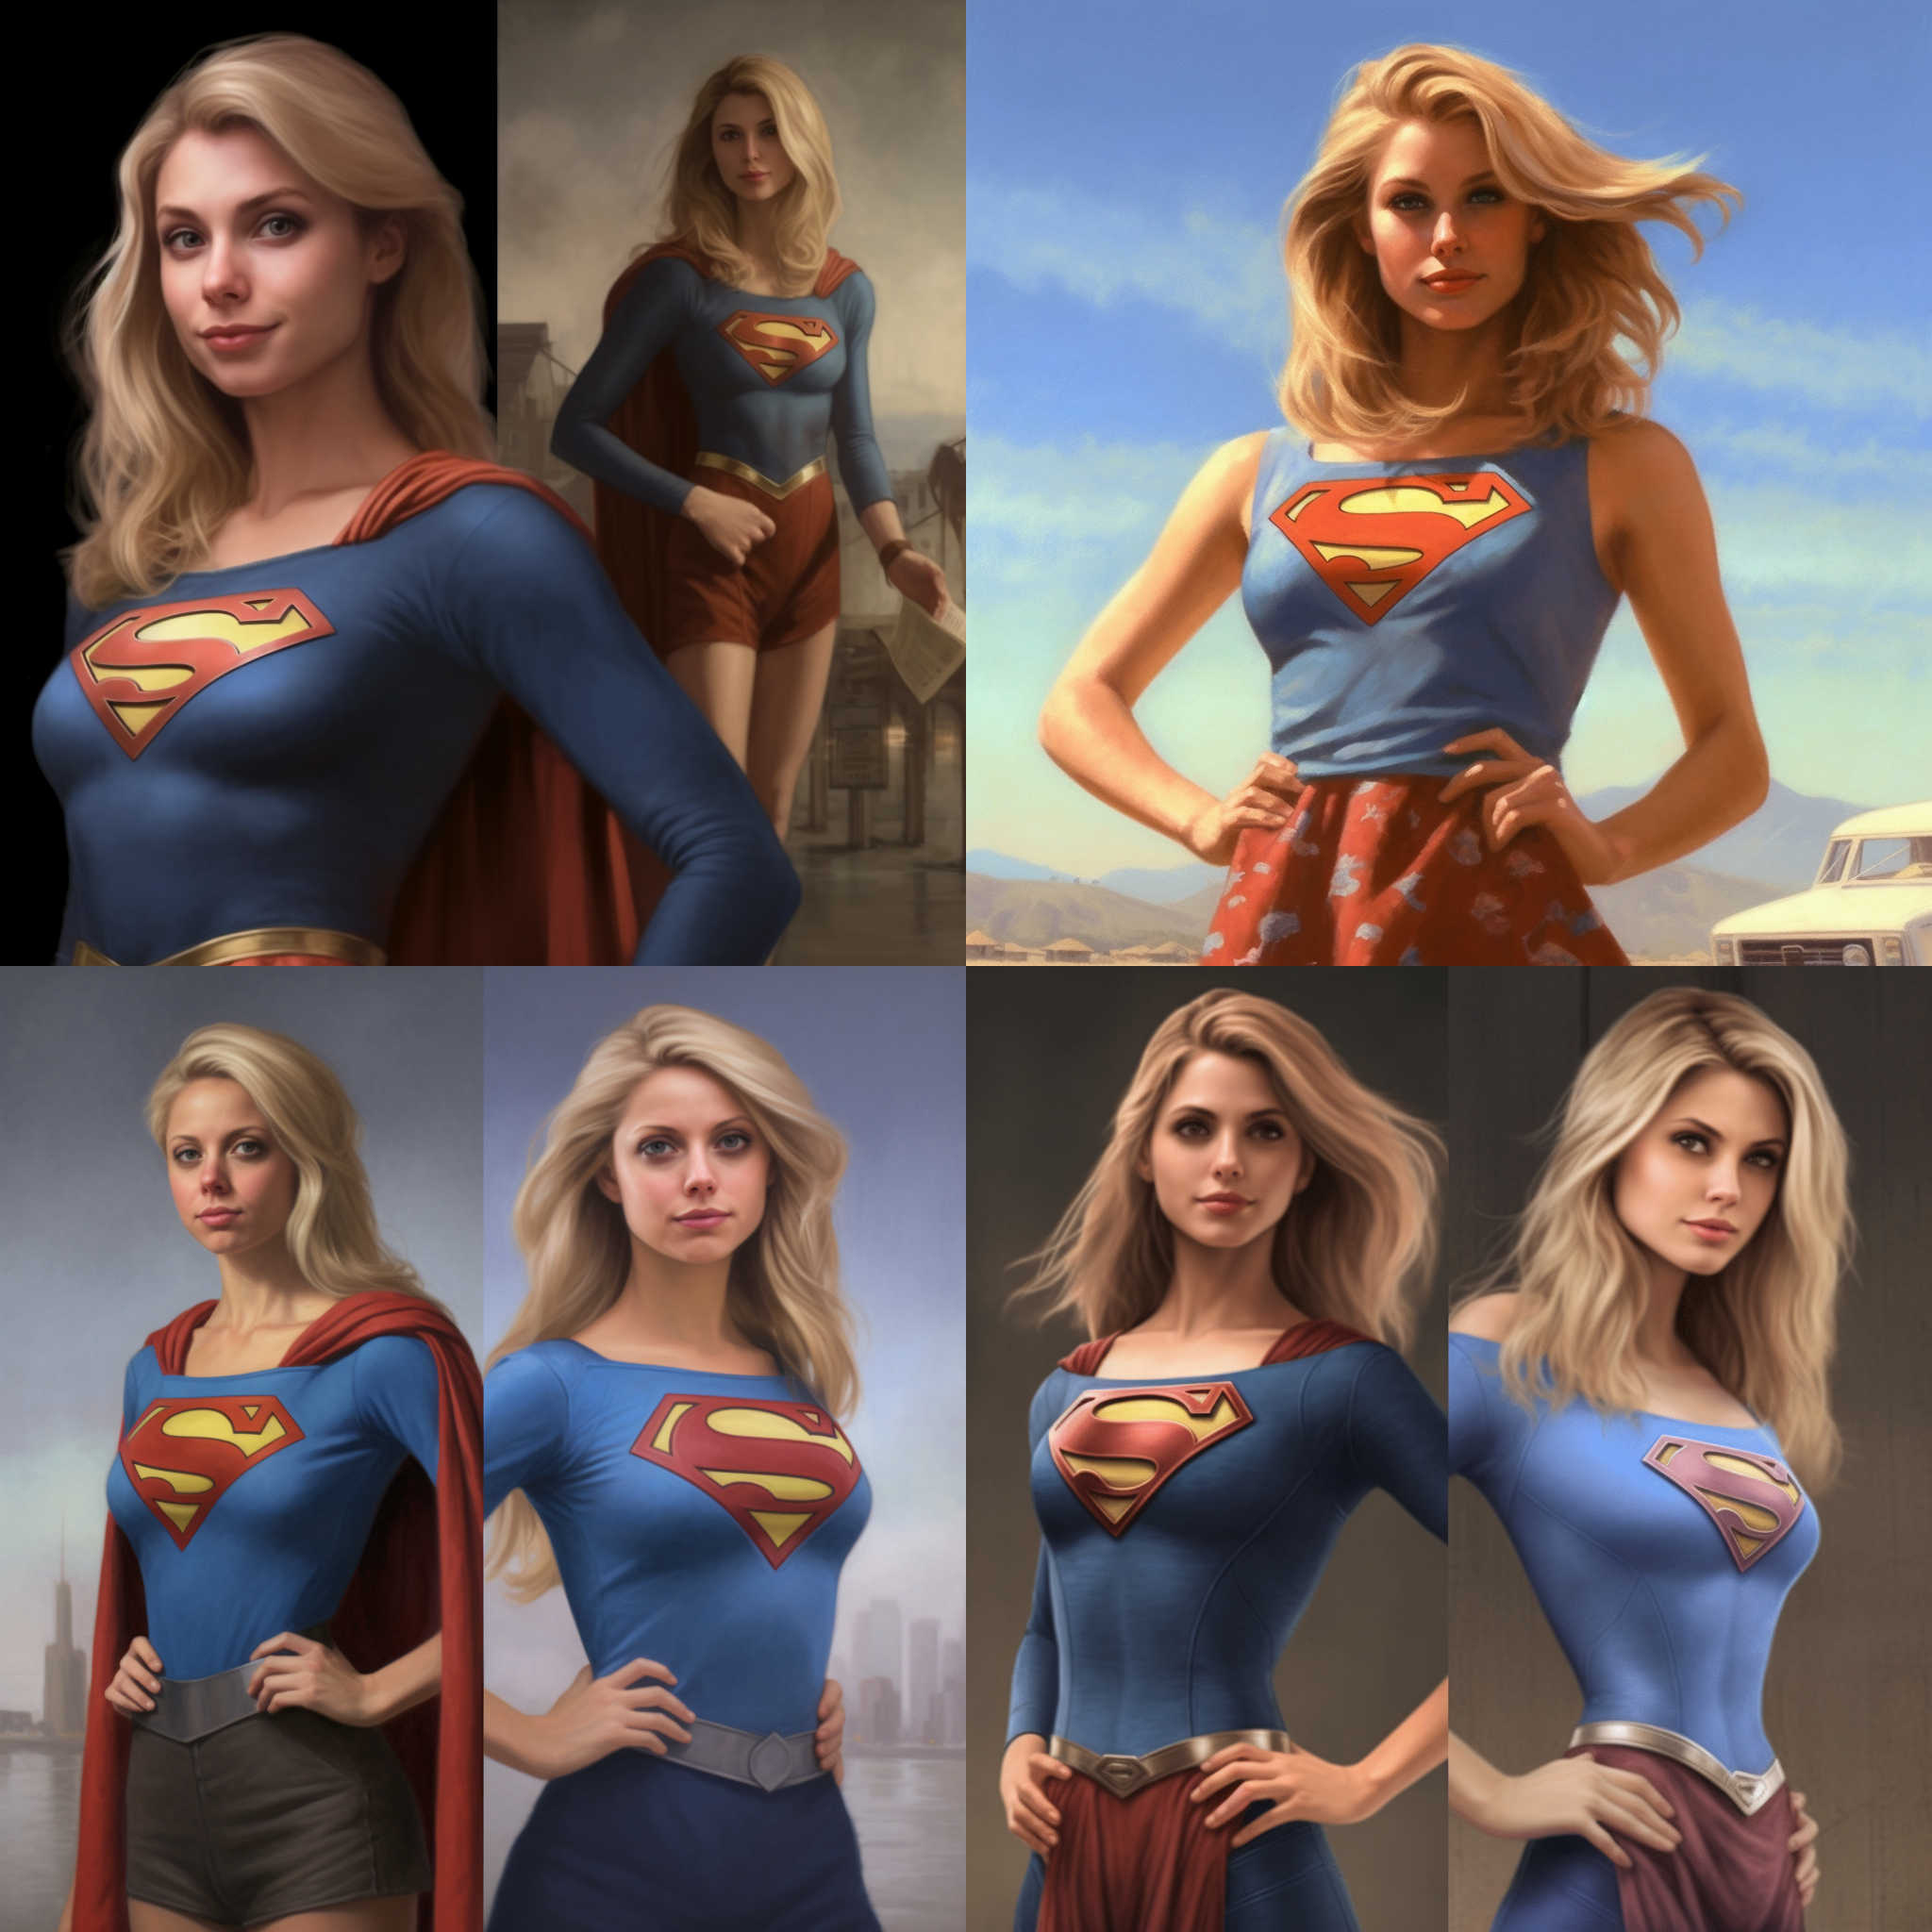 Sir_Frogdick_Supergirl_in_comic_book_form_photorealistic_Superg_5cab6723-9a45-4988-87f8-f34cdadfe6de.png